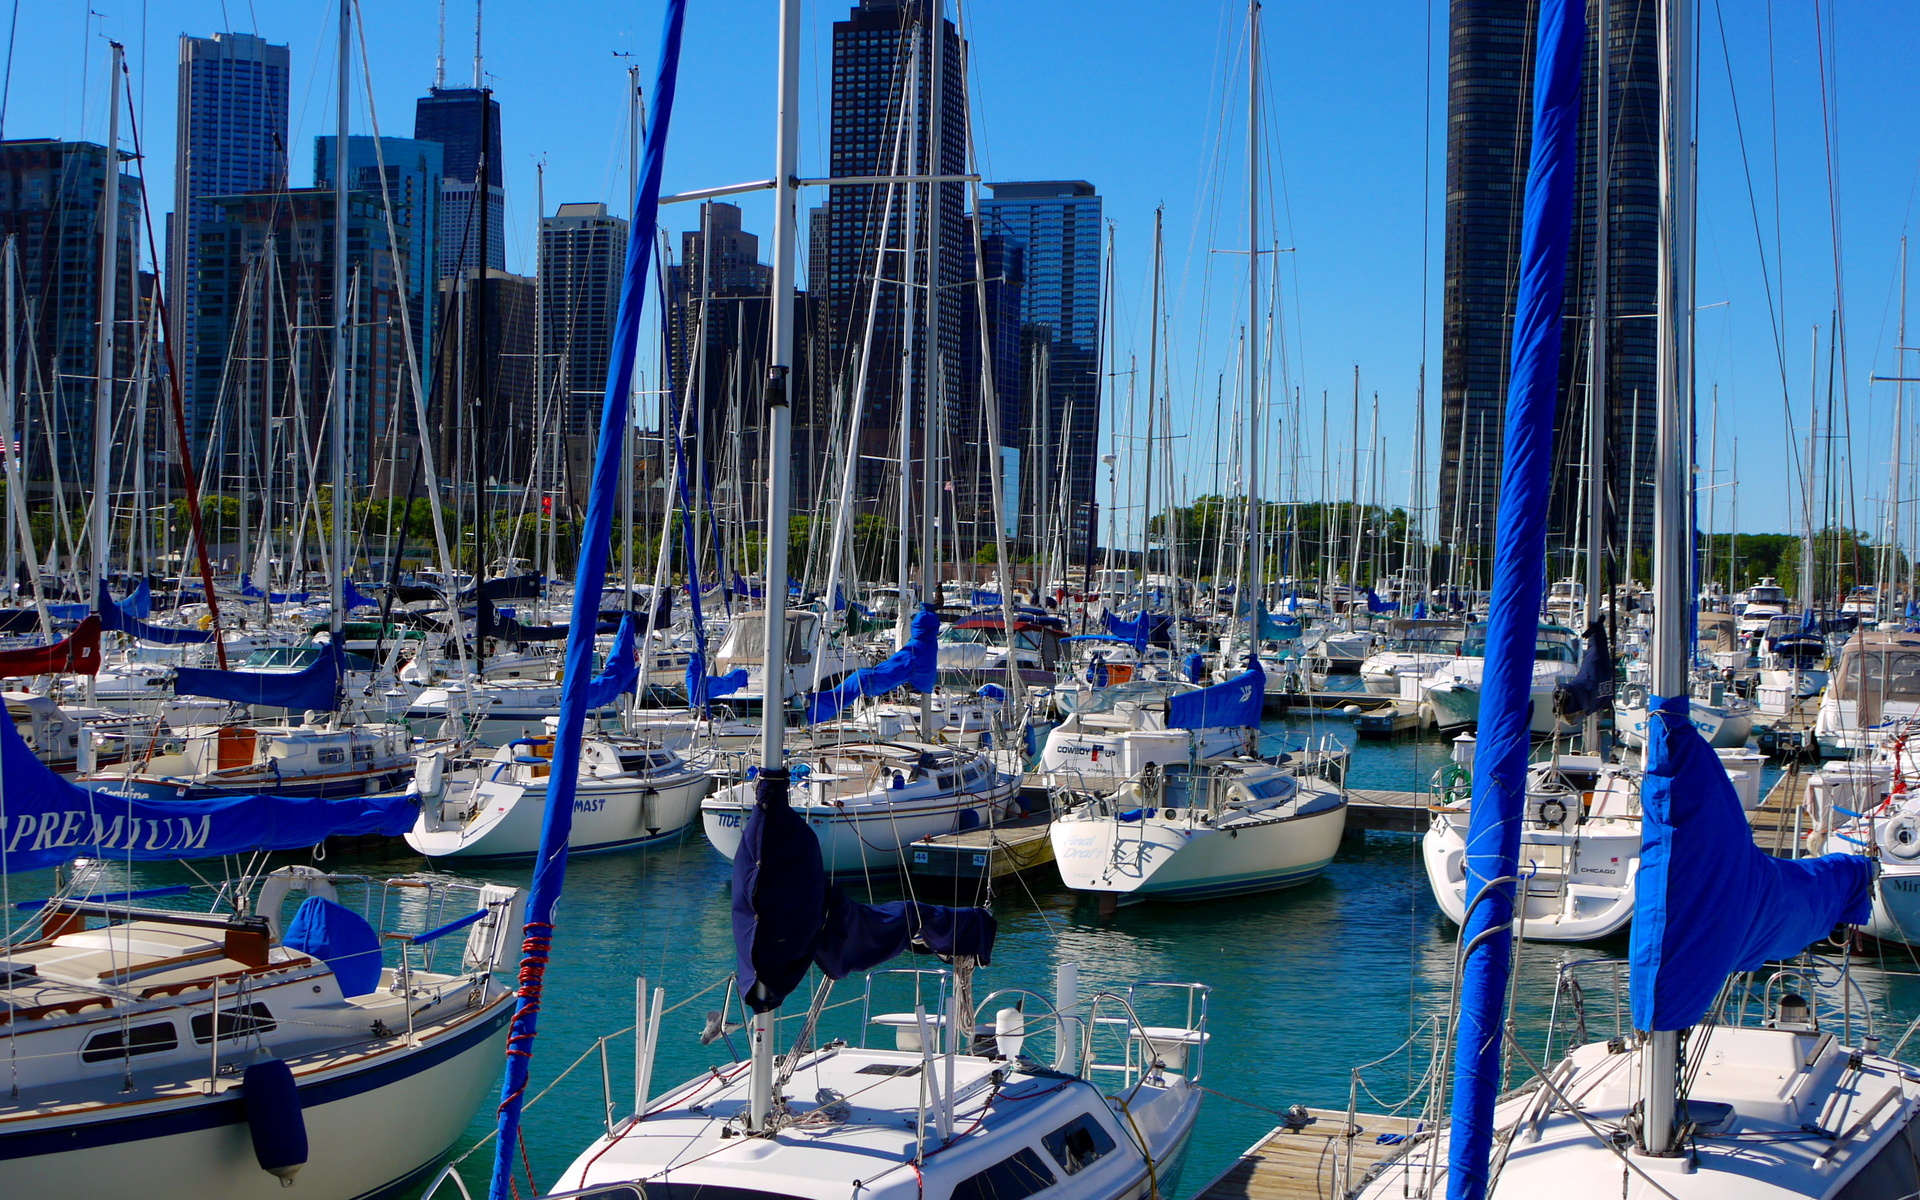 ships, Sailing, Usa, Chicago, Boats, Marina, Cities, Architecture, Buildings, Skyscrapers, Sailboat Wallpaper